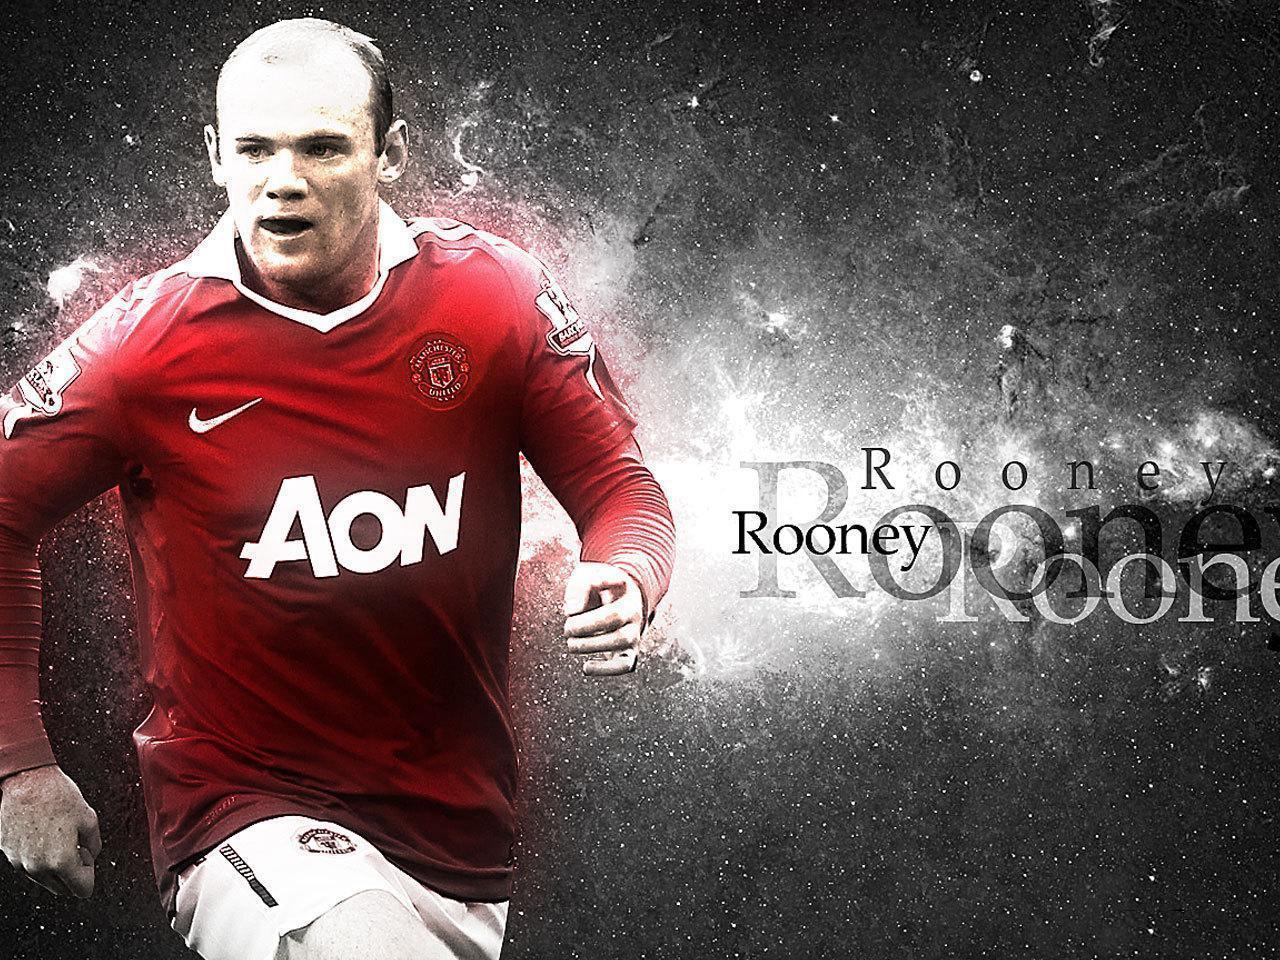 Wayne Rooney Manchester United Top Forward Player